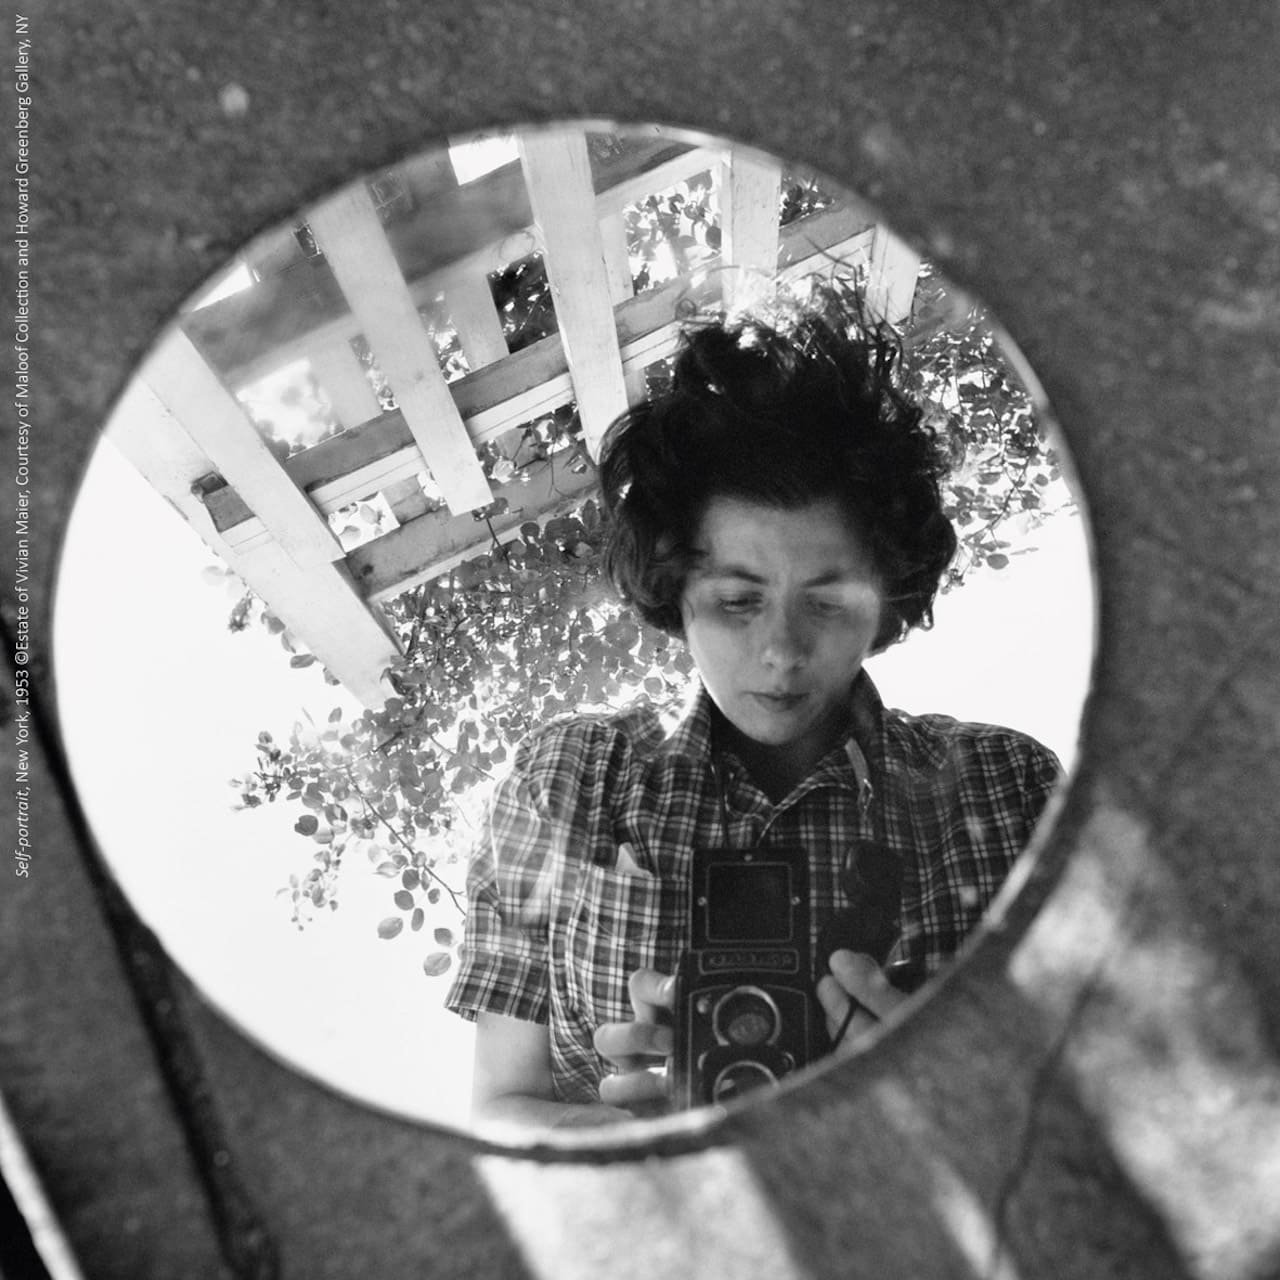 Self-portrait, New York, 1953 ©Estate of Vivian Maier, Courtesy of Maloof Collection and Howard Greenberg Gallery, NY